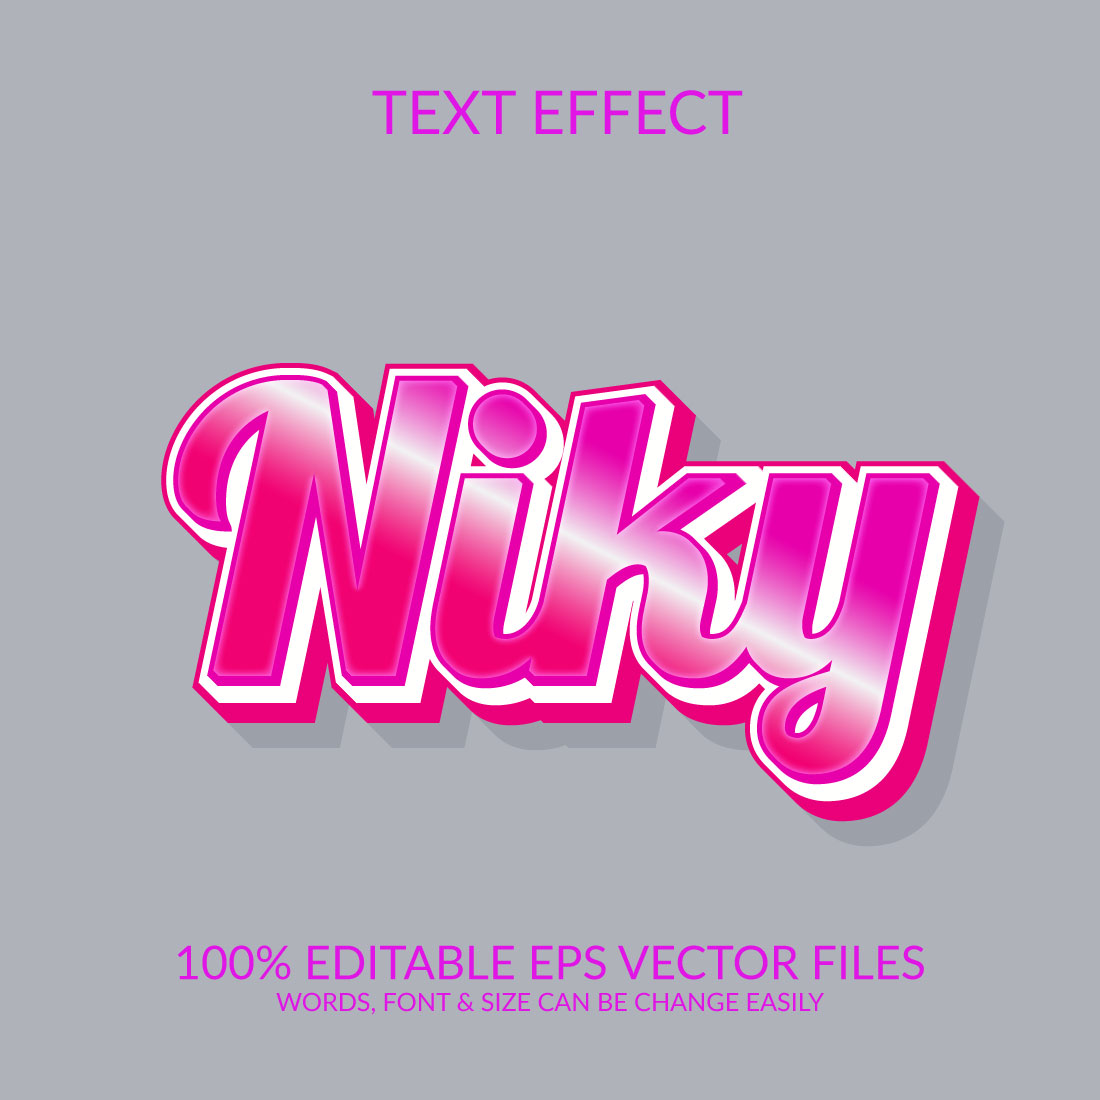 Niky Editable Text Effect Template Design cover image.